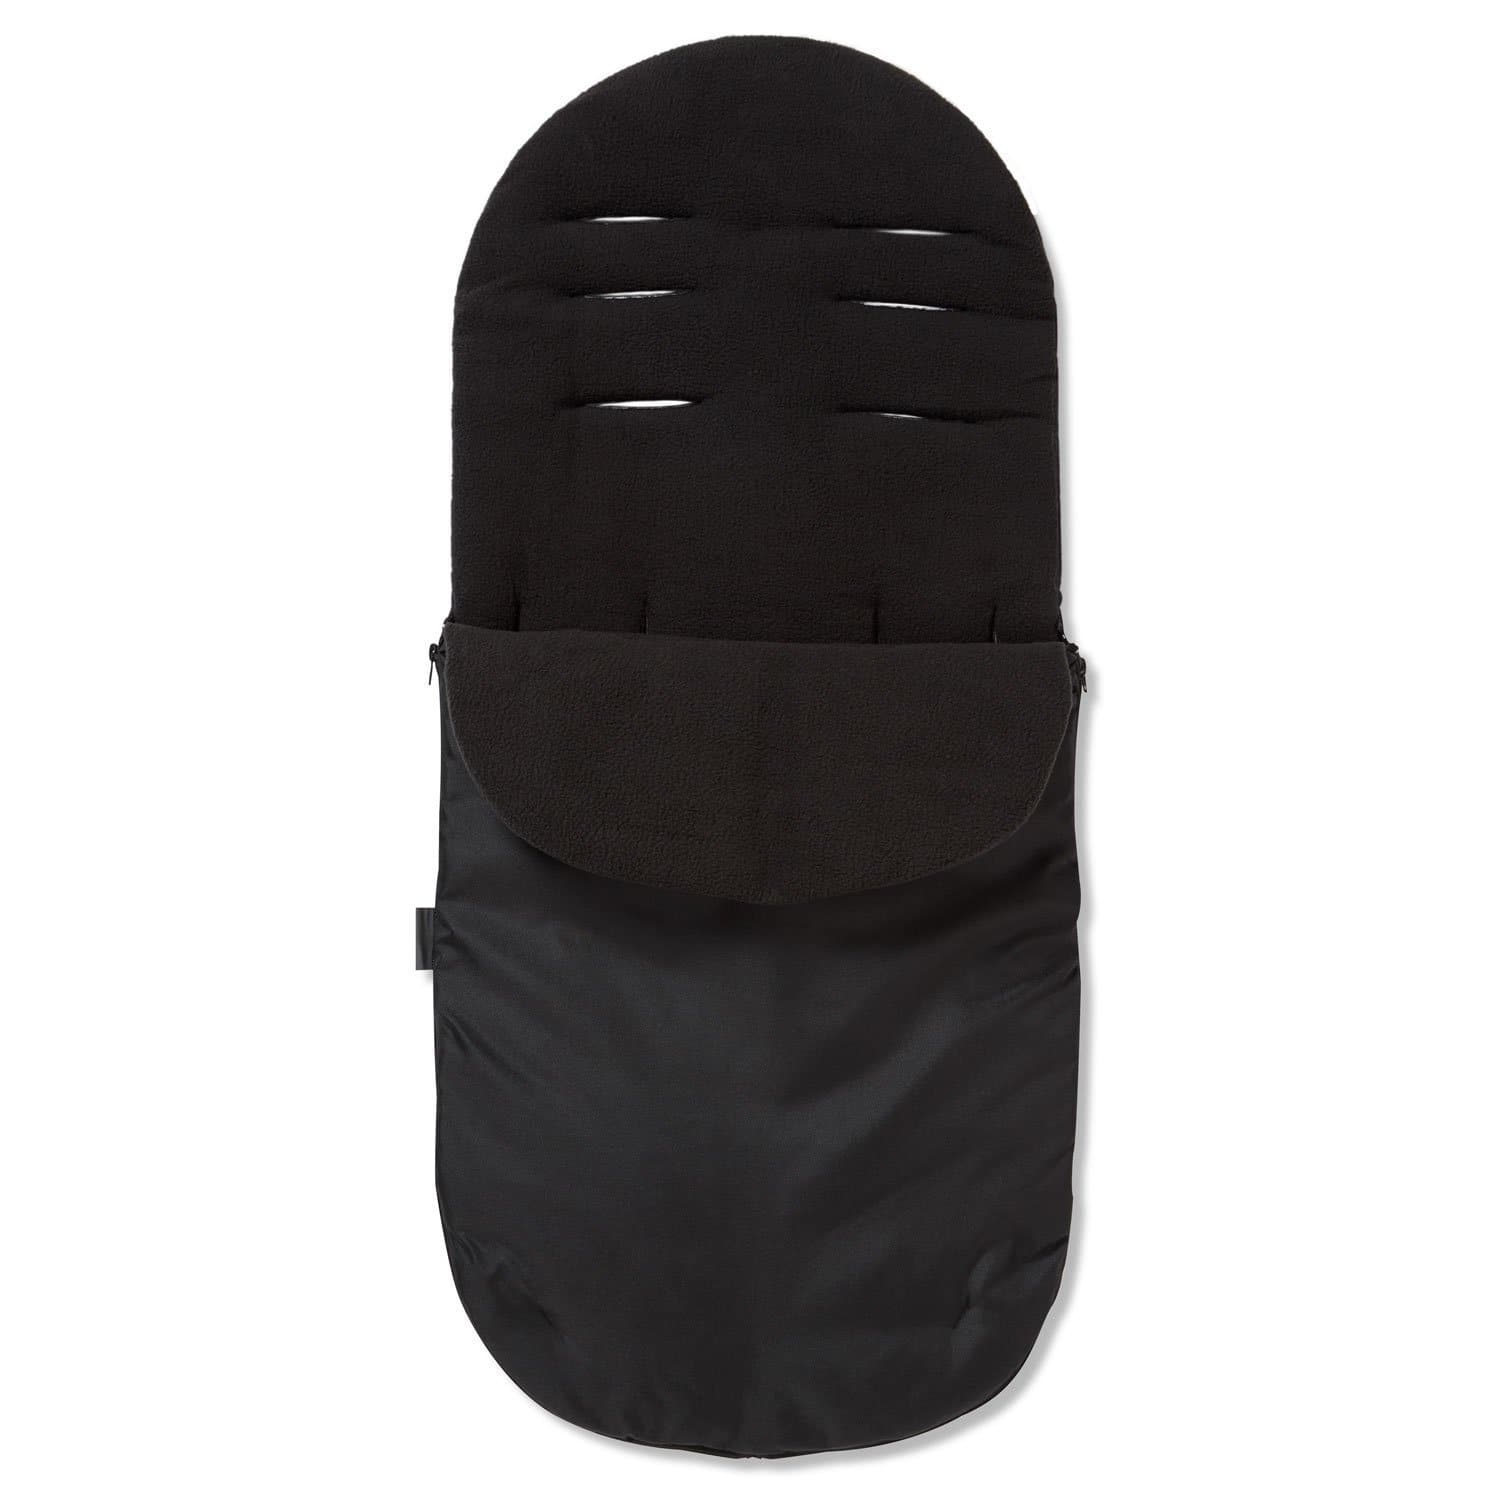 Footmuff / Cosy Toes Compatible with Cosatto - Black / Fits All Models | For Your Little One